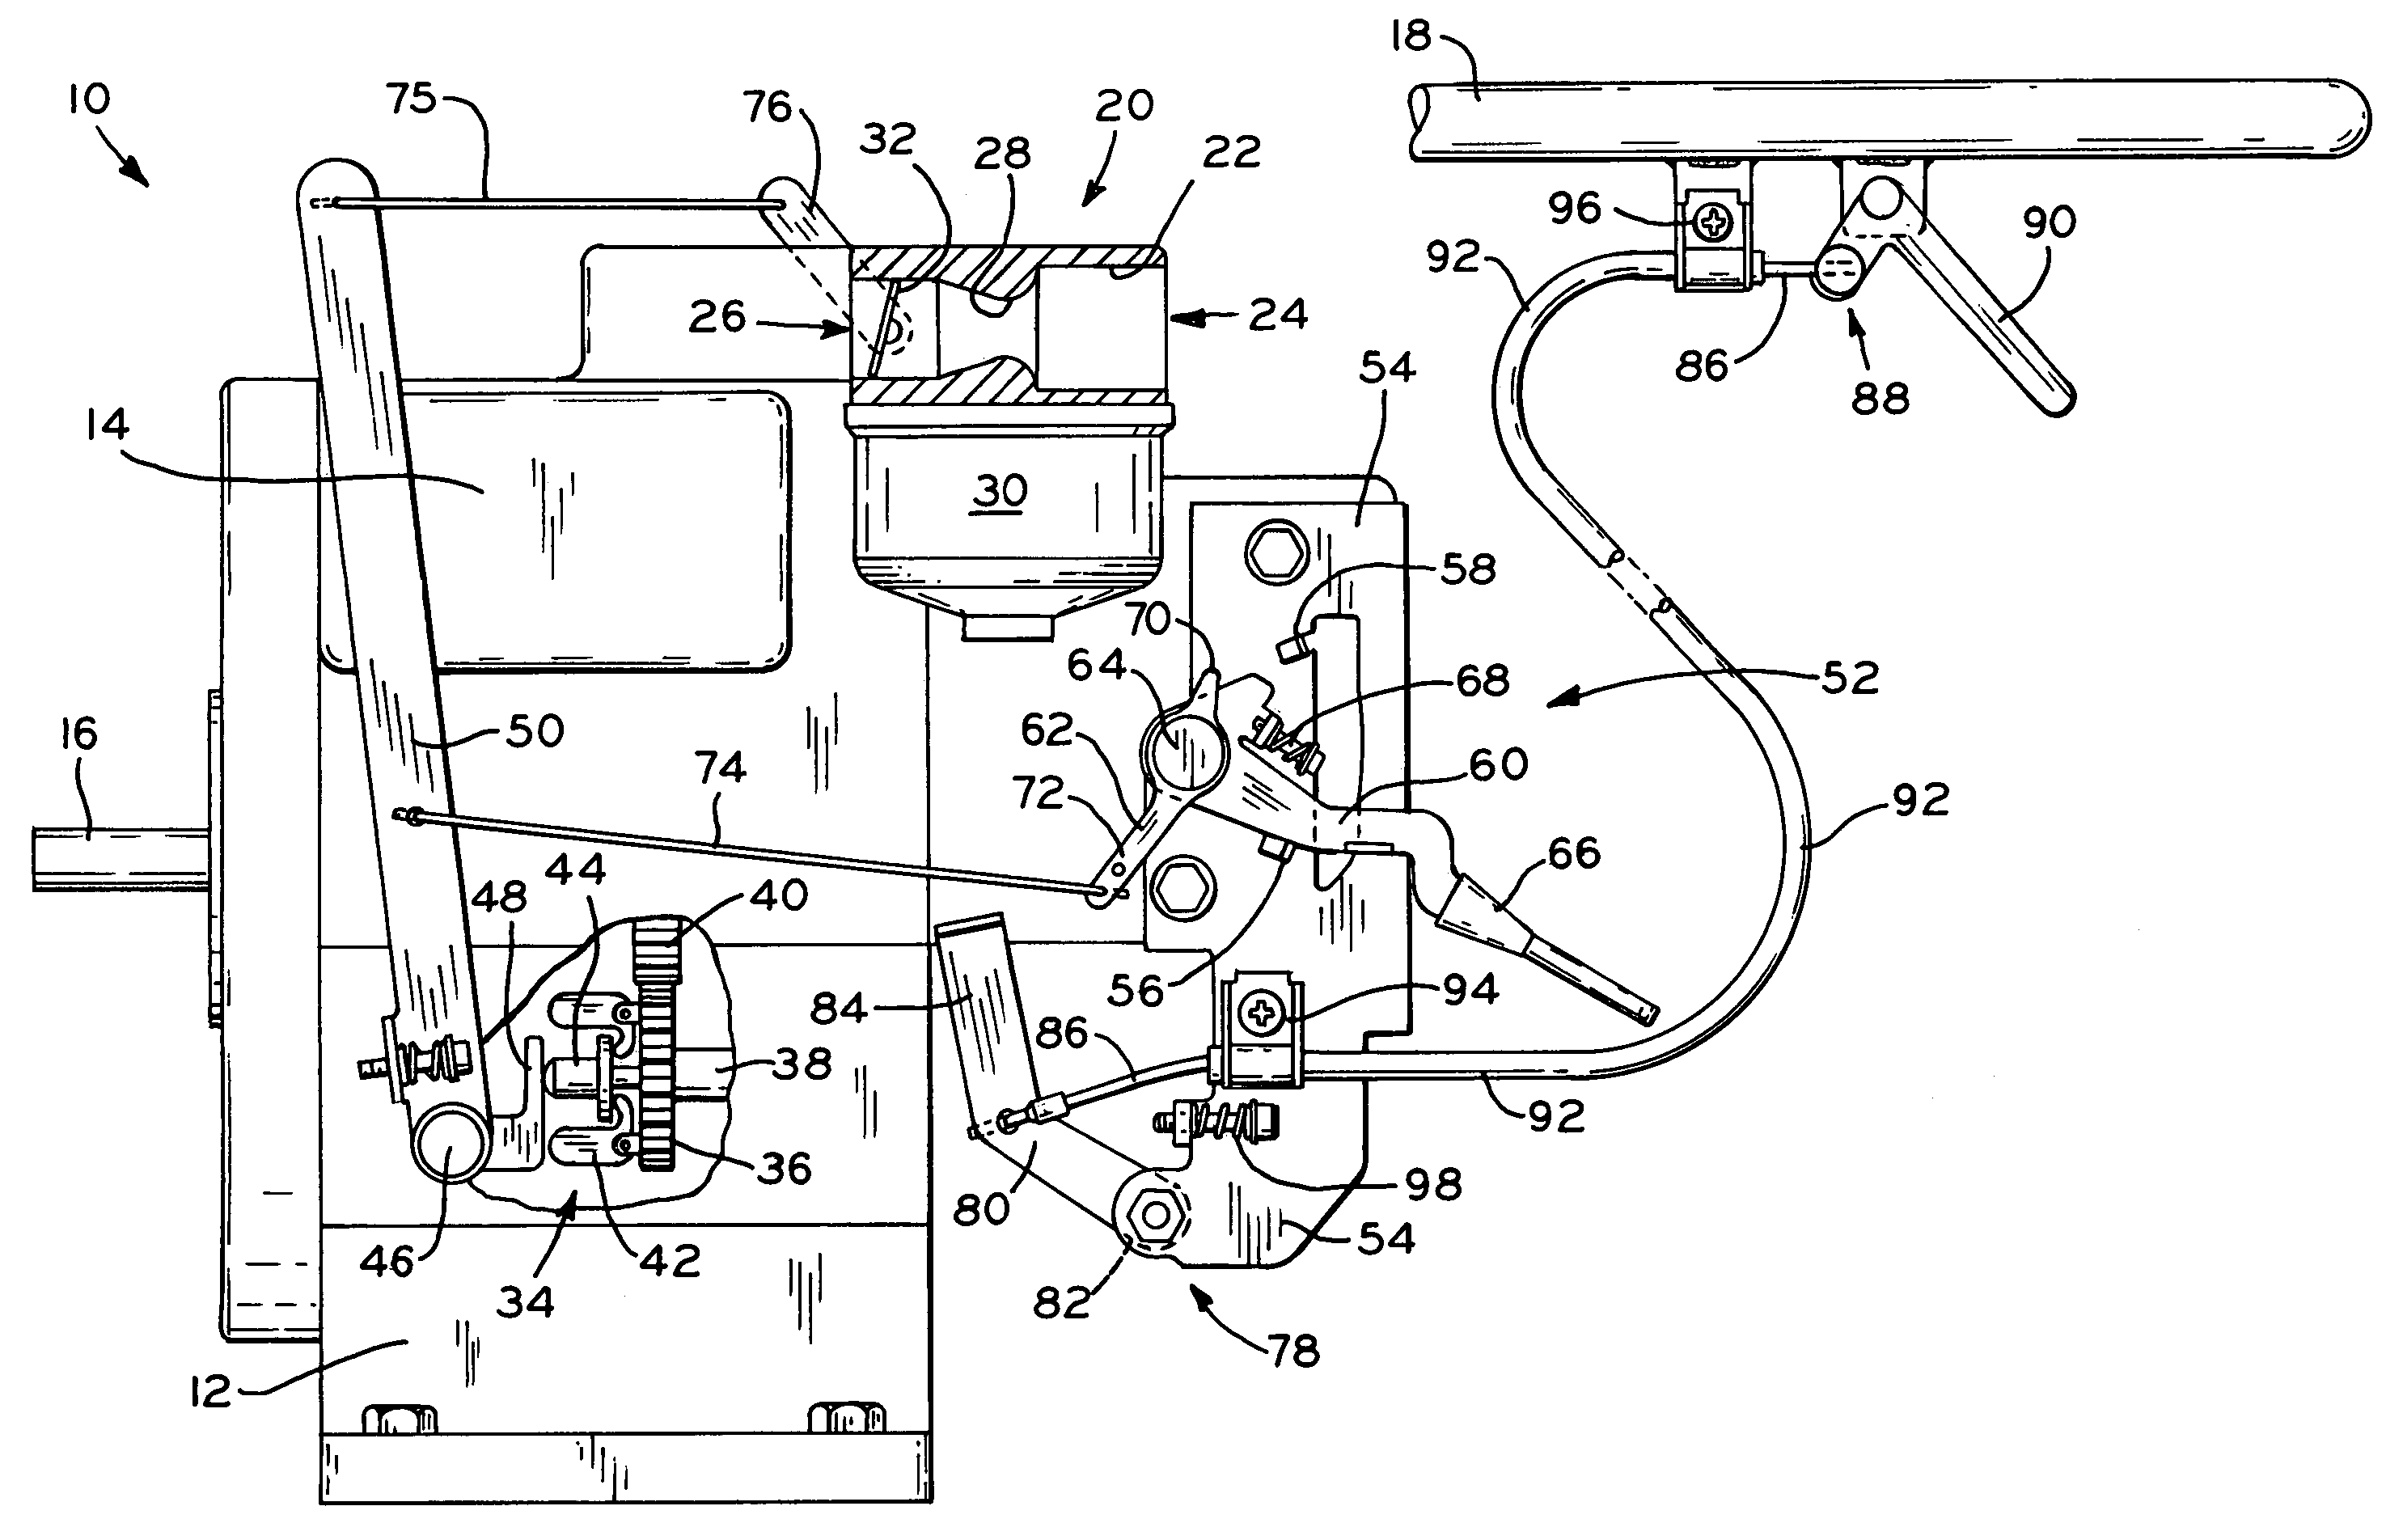 Engine speed control with high speed override mechanism